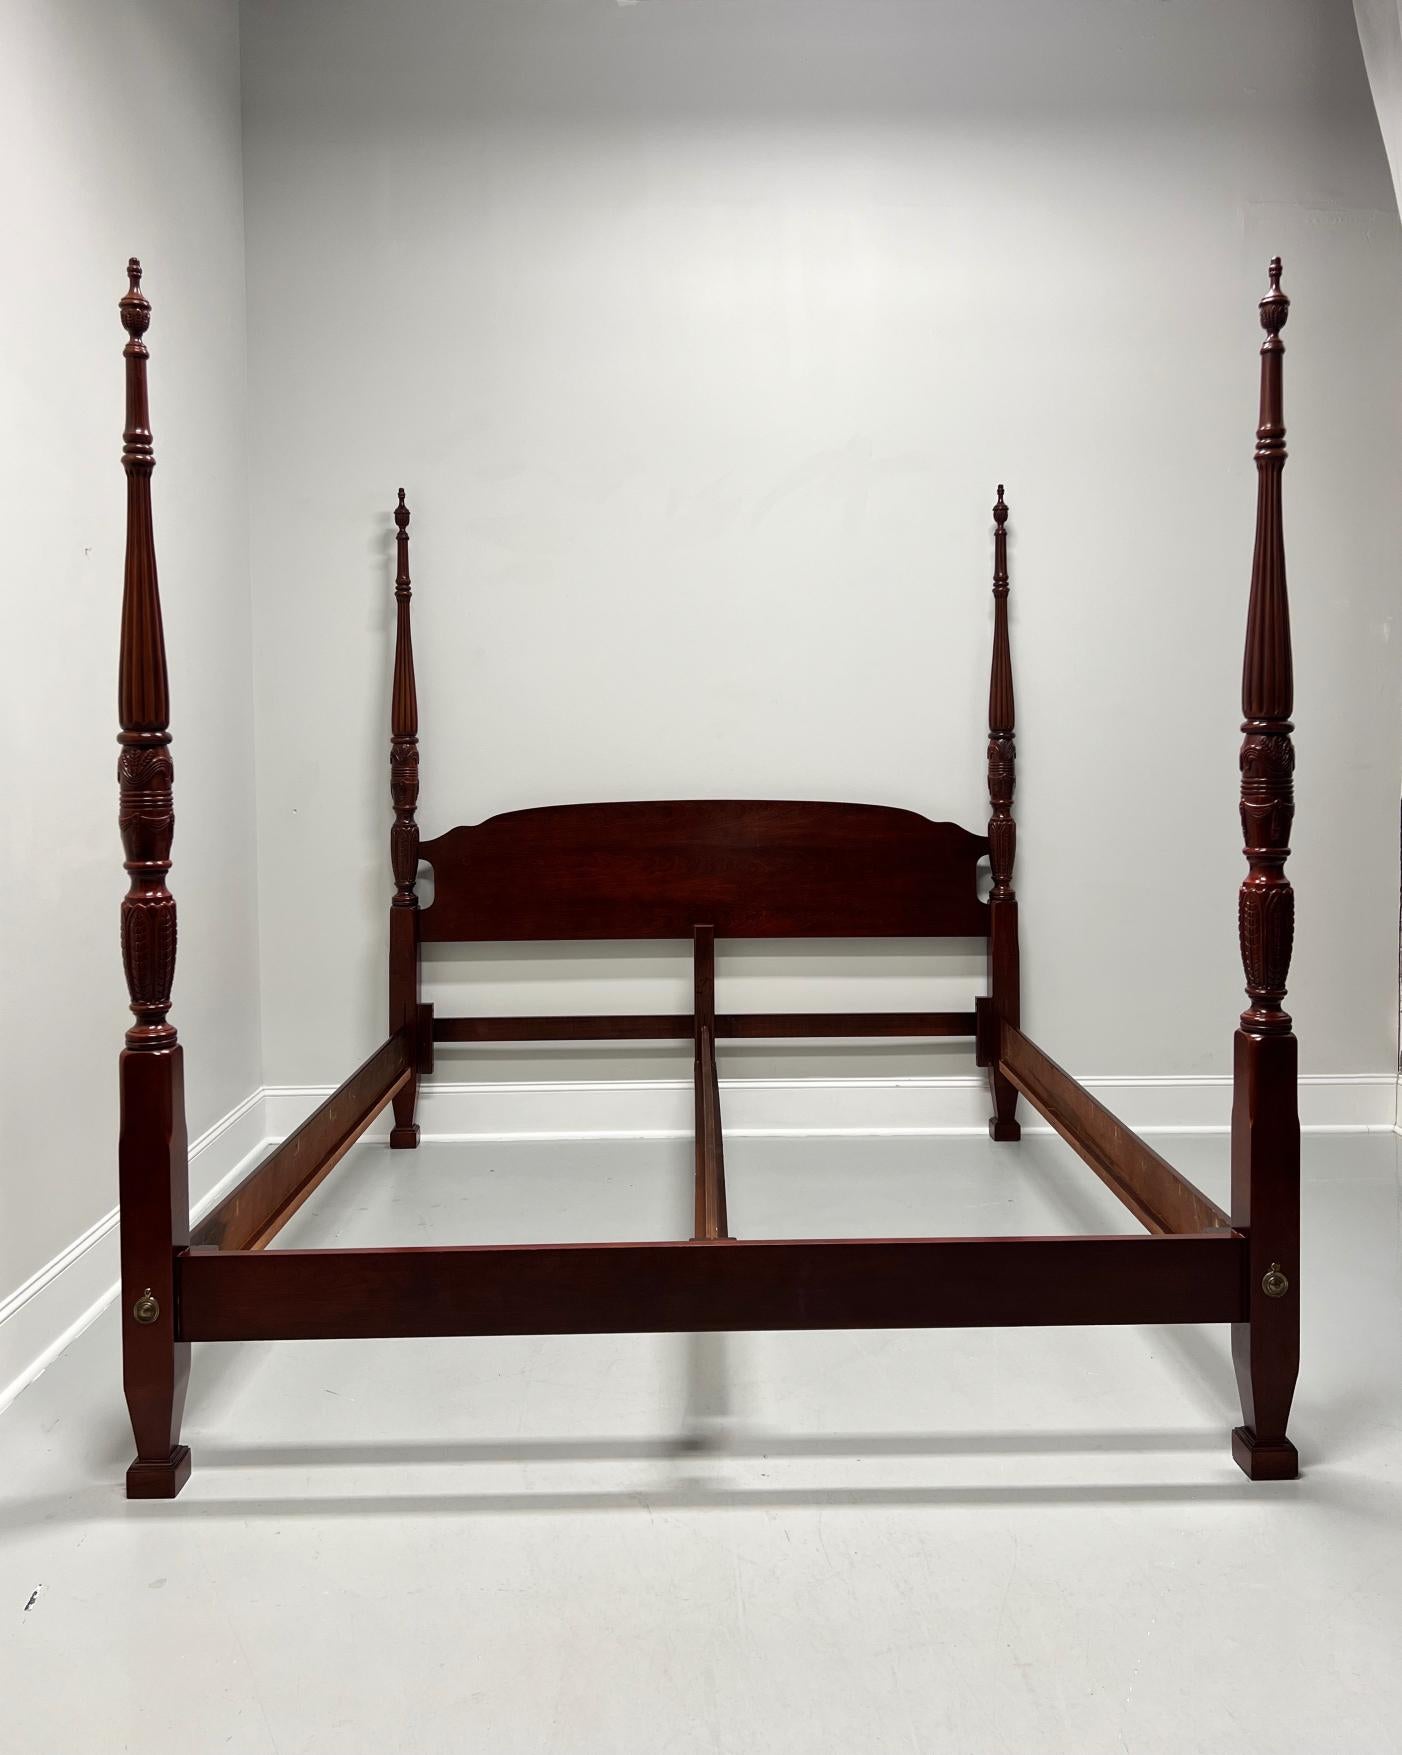 A Chippendale style king size four poster bed, unbranded, similar in quality to Lexington or Thomasville. Cherry wood with carved arch headboard, four tobacco leaf carved posts capped by finials, clip held side & center rails with affixed wooden